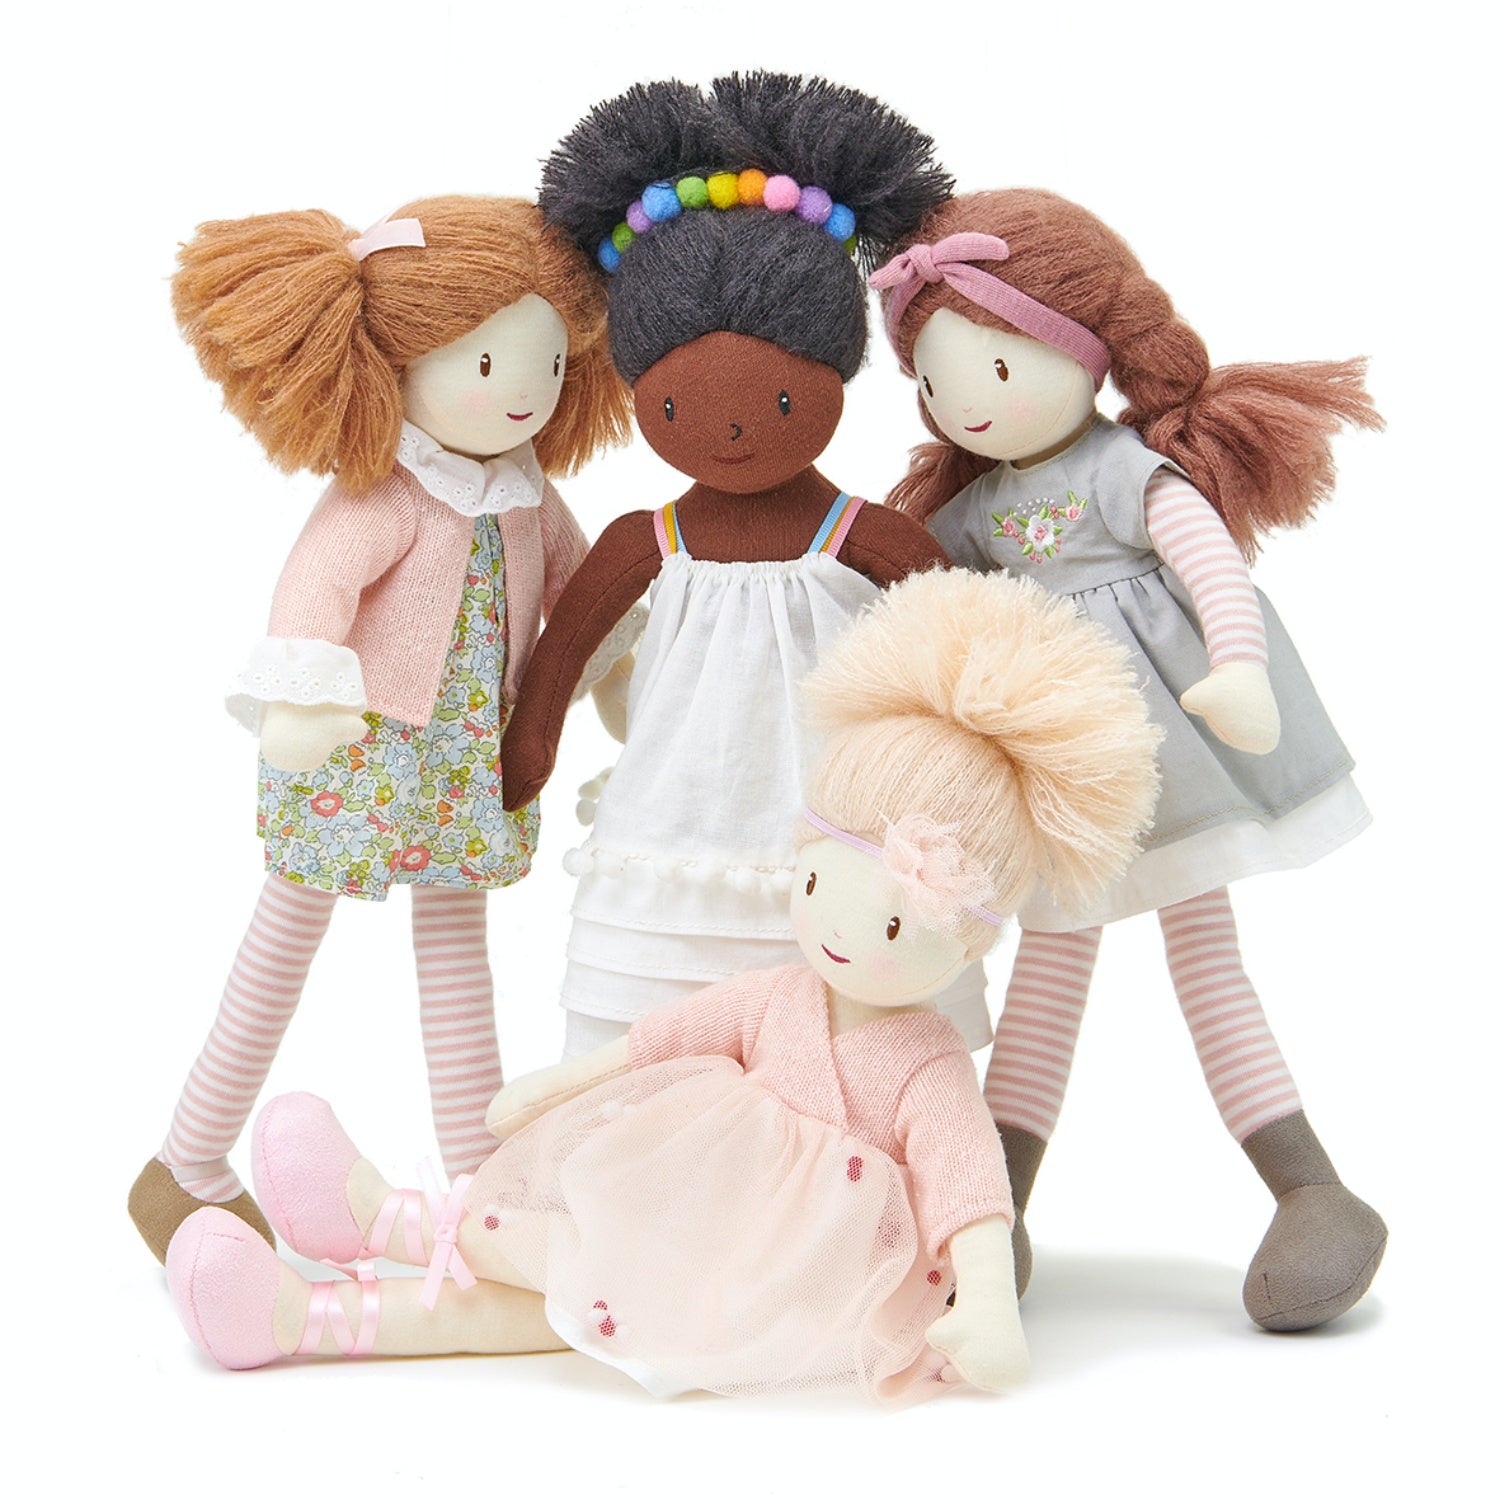 ThreadBear Design Amelie Ballerina Rag Doll | Soft Cotton Children’s Doll | Hand-Crafted Rag Doll | Front View – Rag Doll Alma and her friends | BeoVERDE.ie